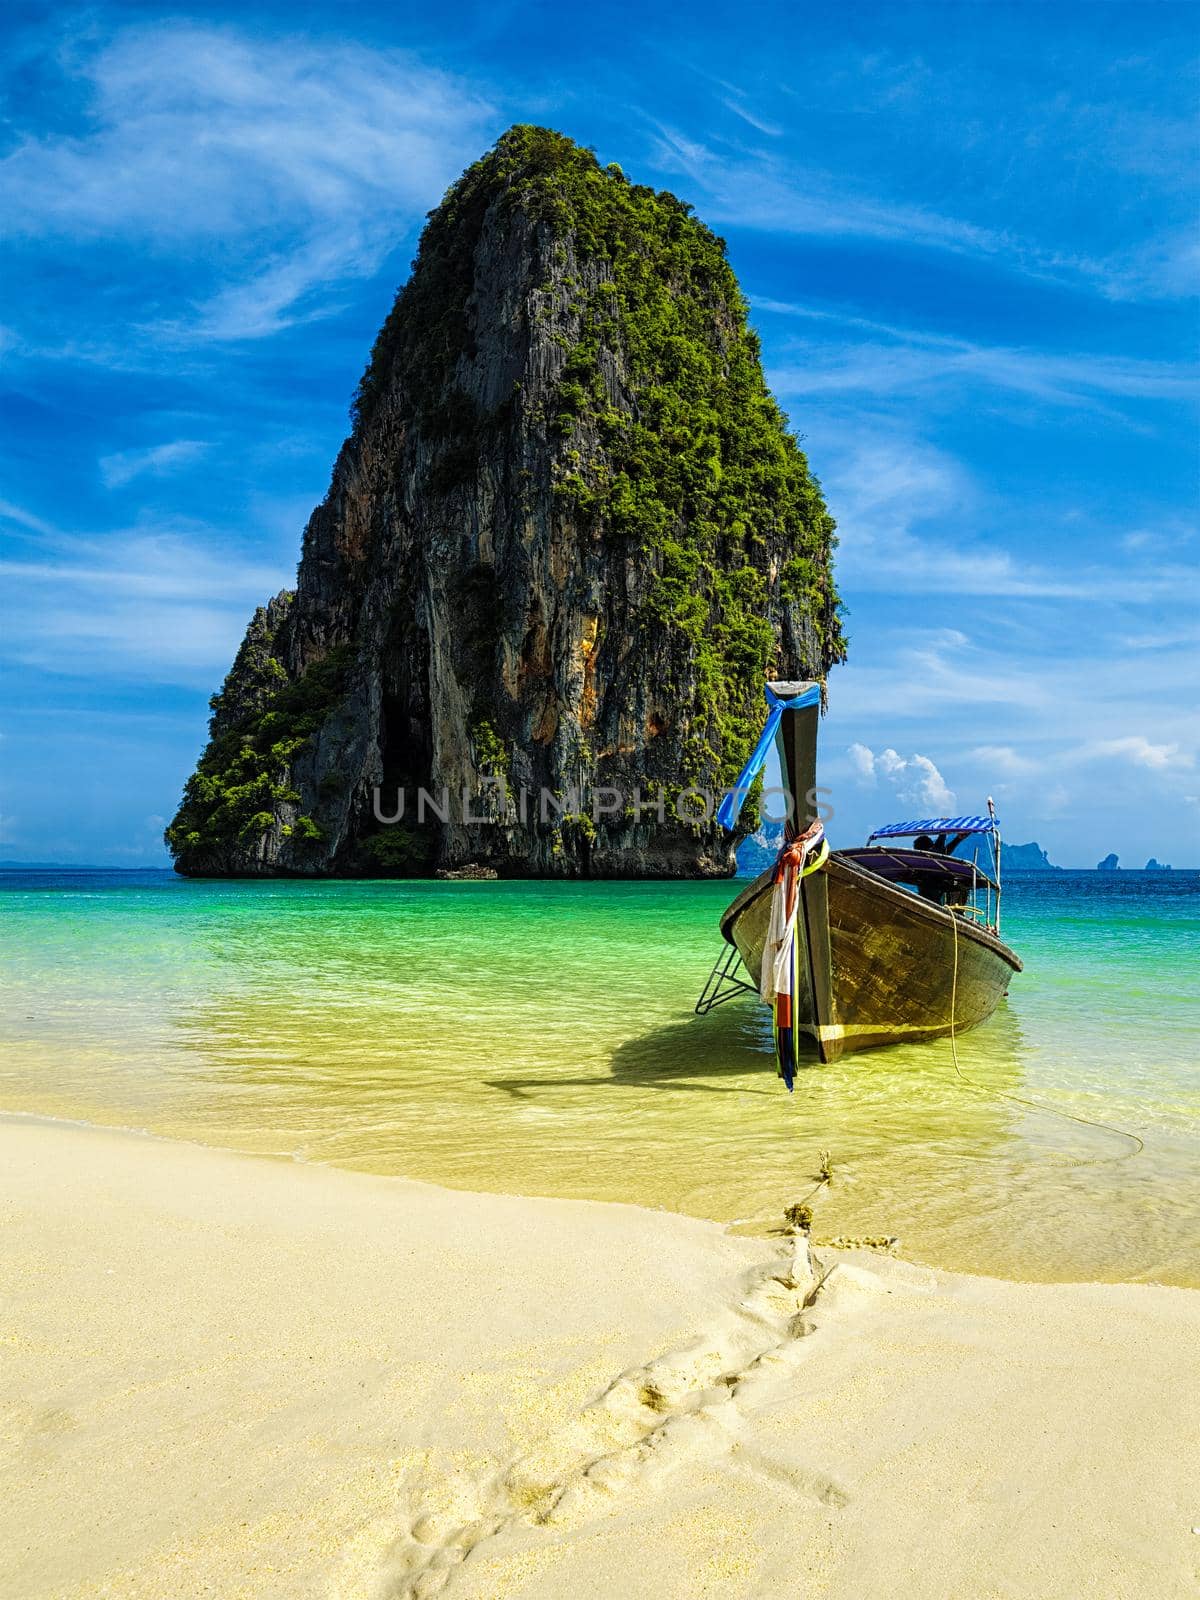 Long tail boat on beach, Thailand by dimol